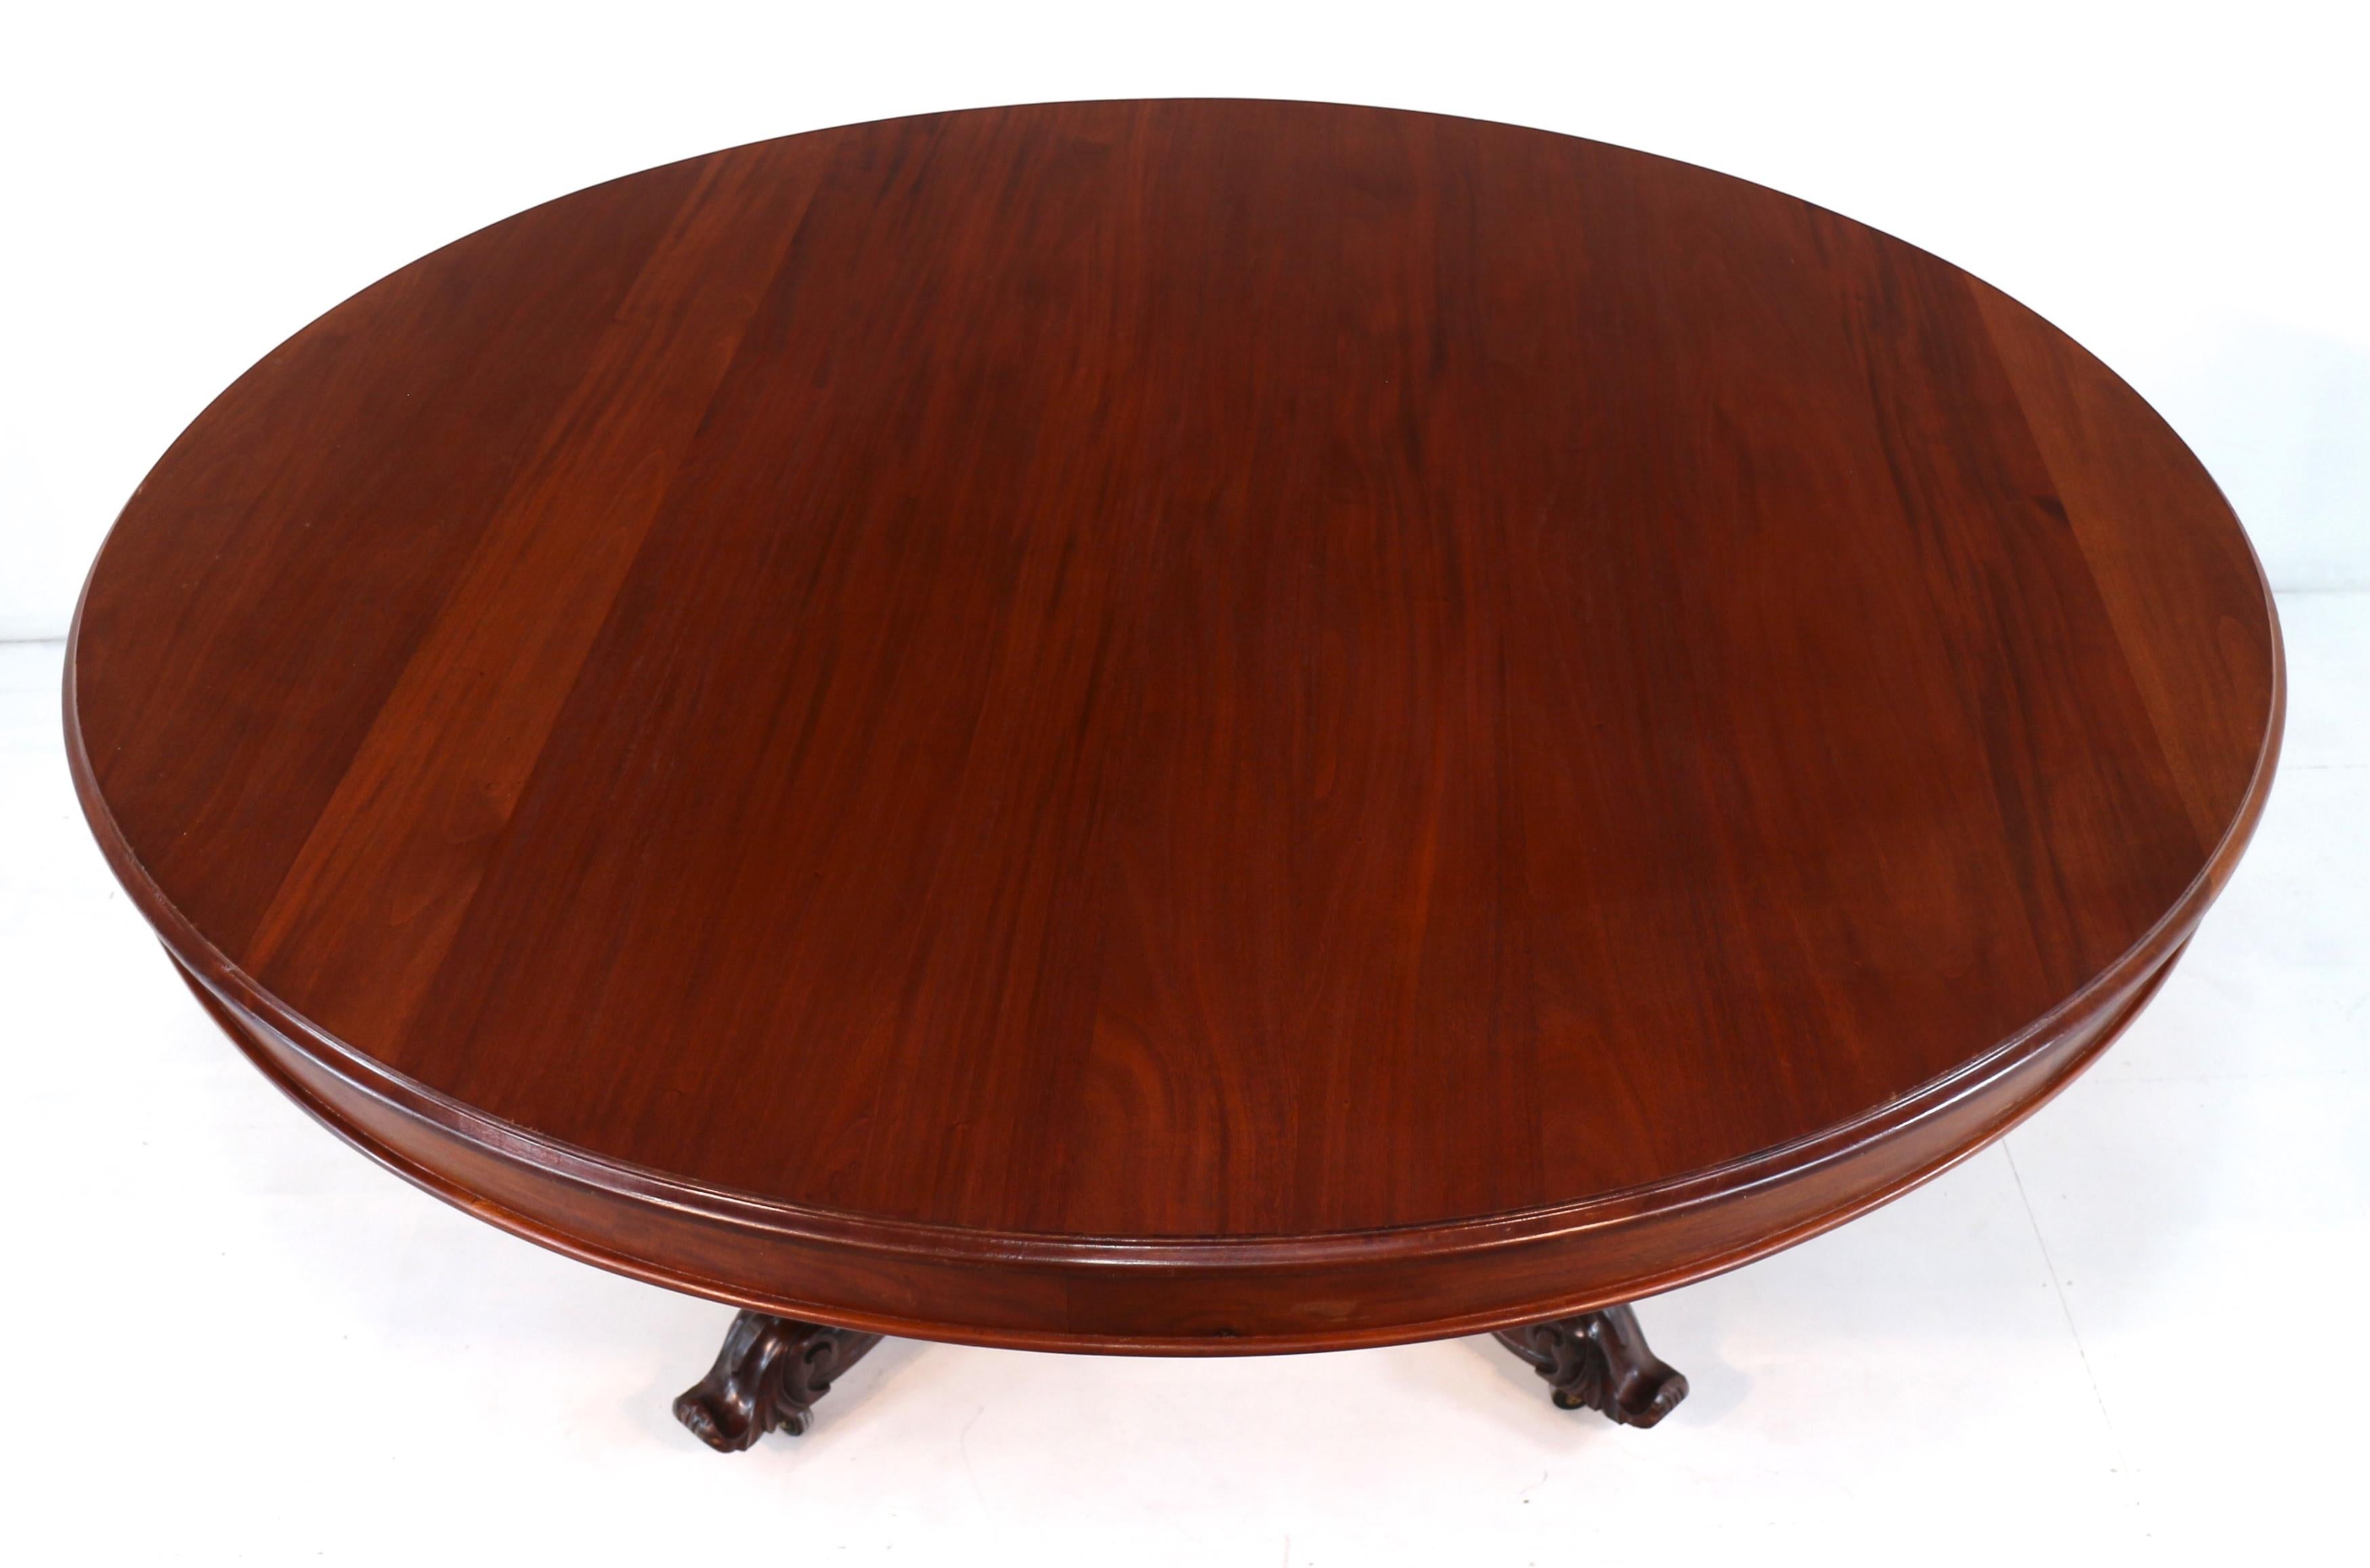 20th Century Large Victorian Style Mahogany Circular Centre Table - 6ft7 / 2m diameter For Sale